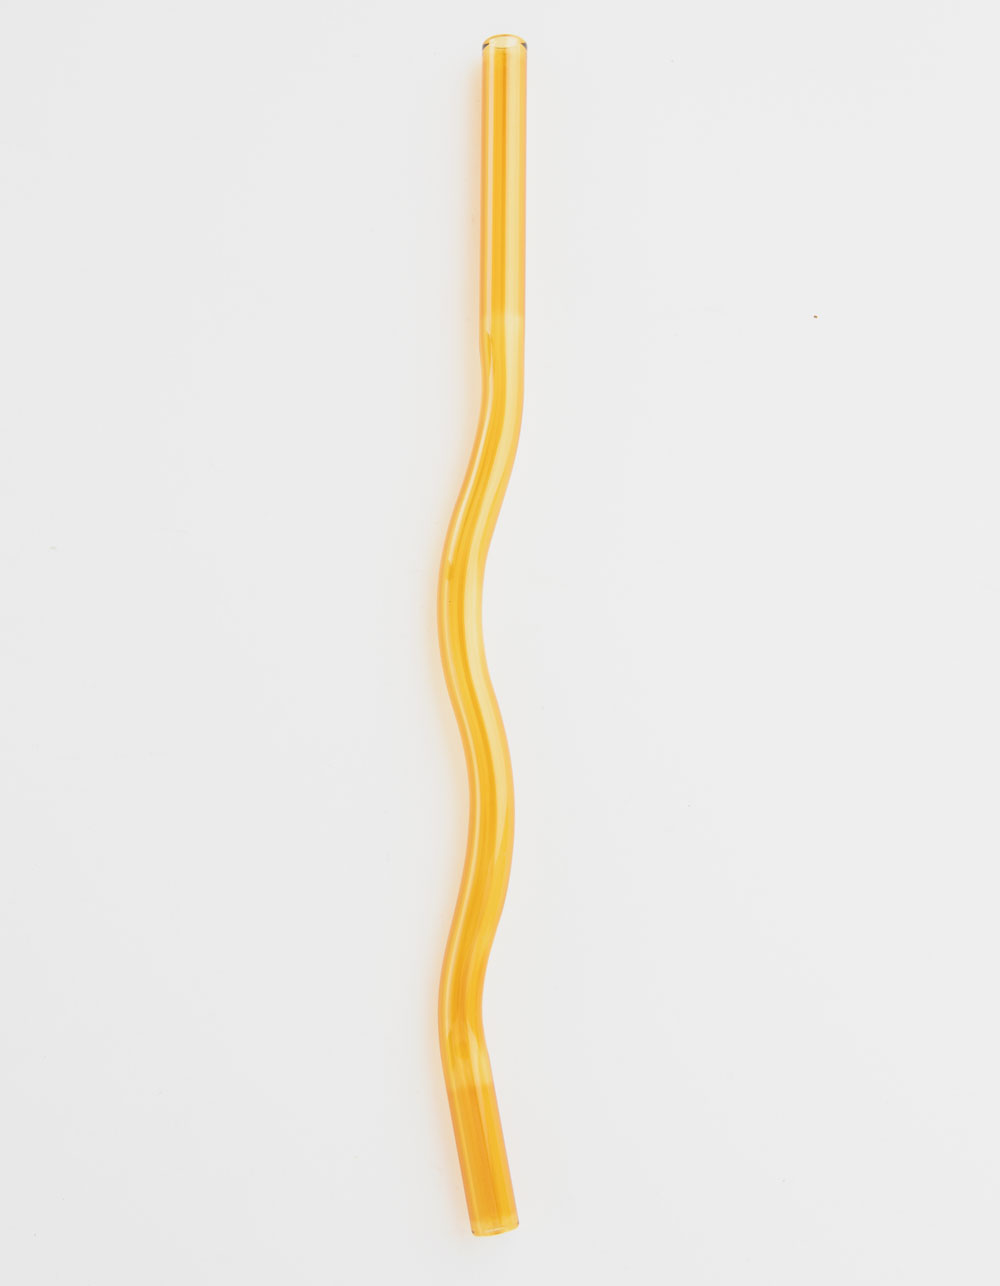 Heavy Duty Amber Glass Drinking Straw by Sarahberry Glass